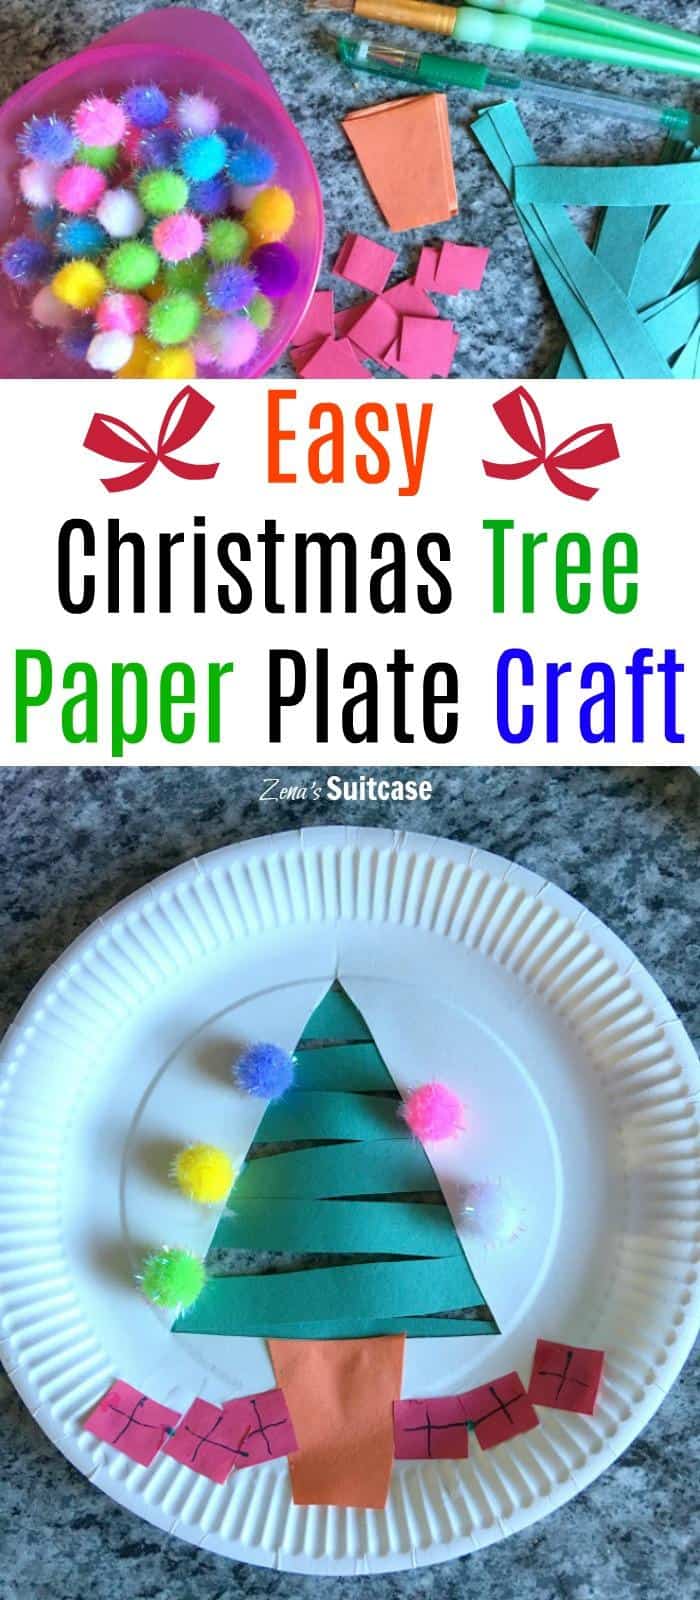 Easy Christmas Tree paper plate craft for kids. Easy decorating craft for young children that includes sticking and decorating for a lovely festive craft activity #Christmastreecraft #Christmascraft #paperplatecraft